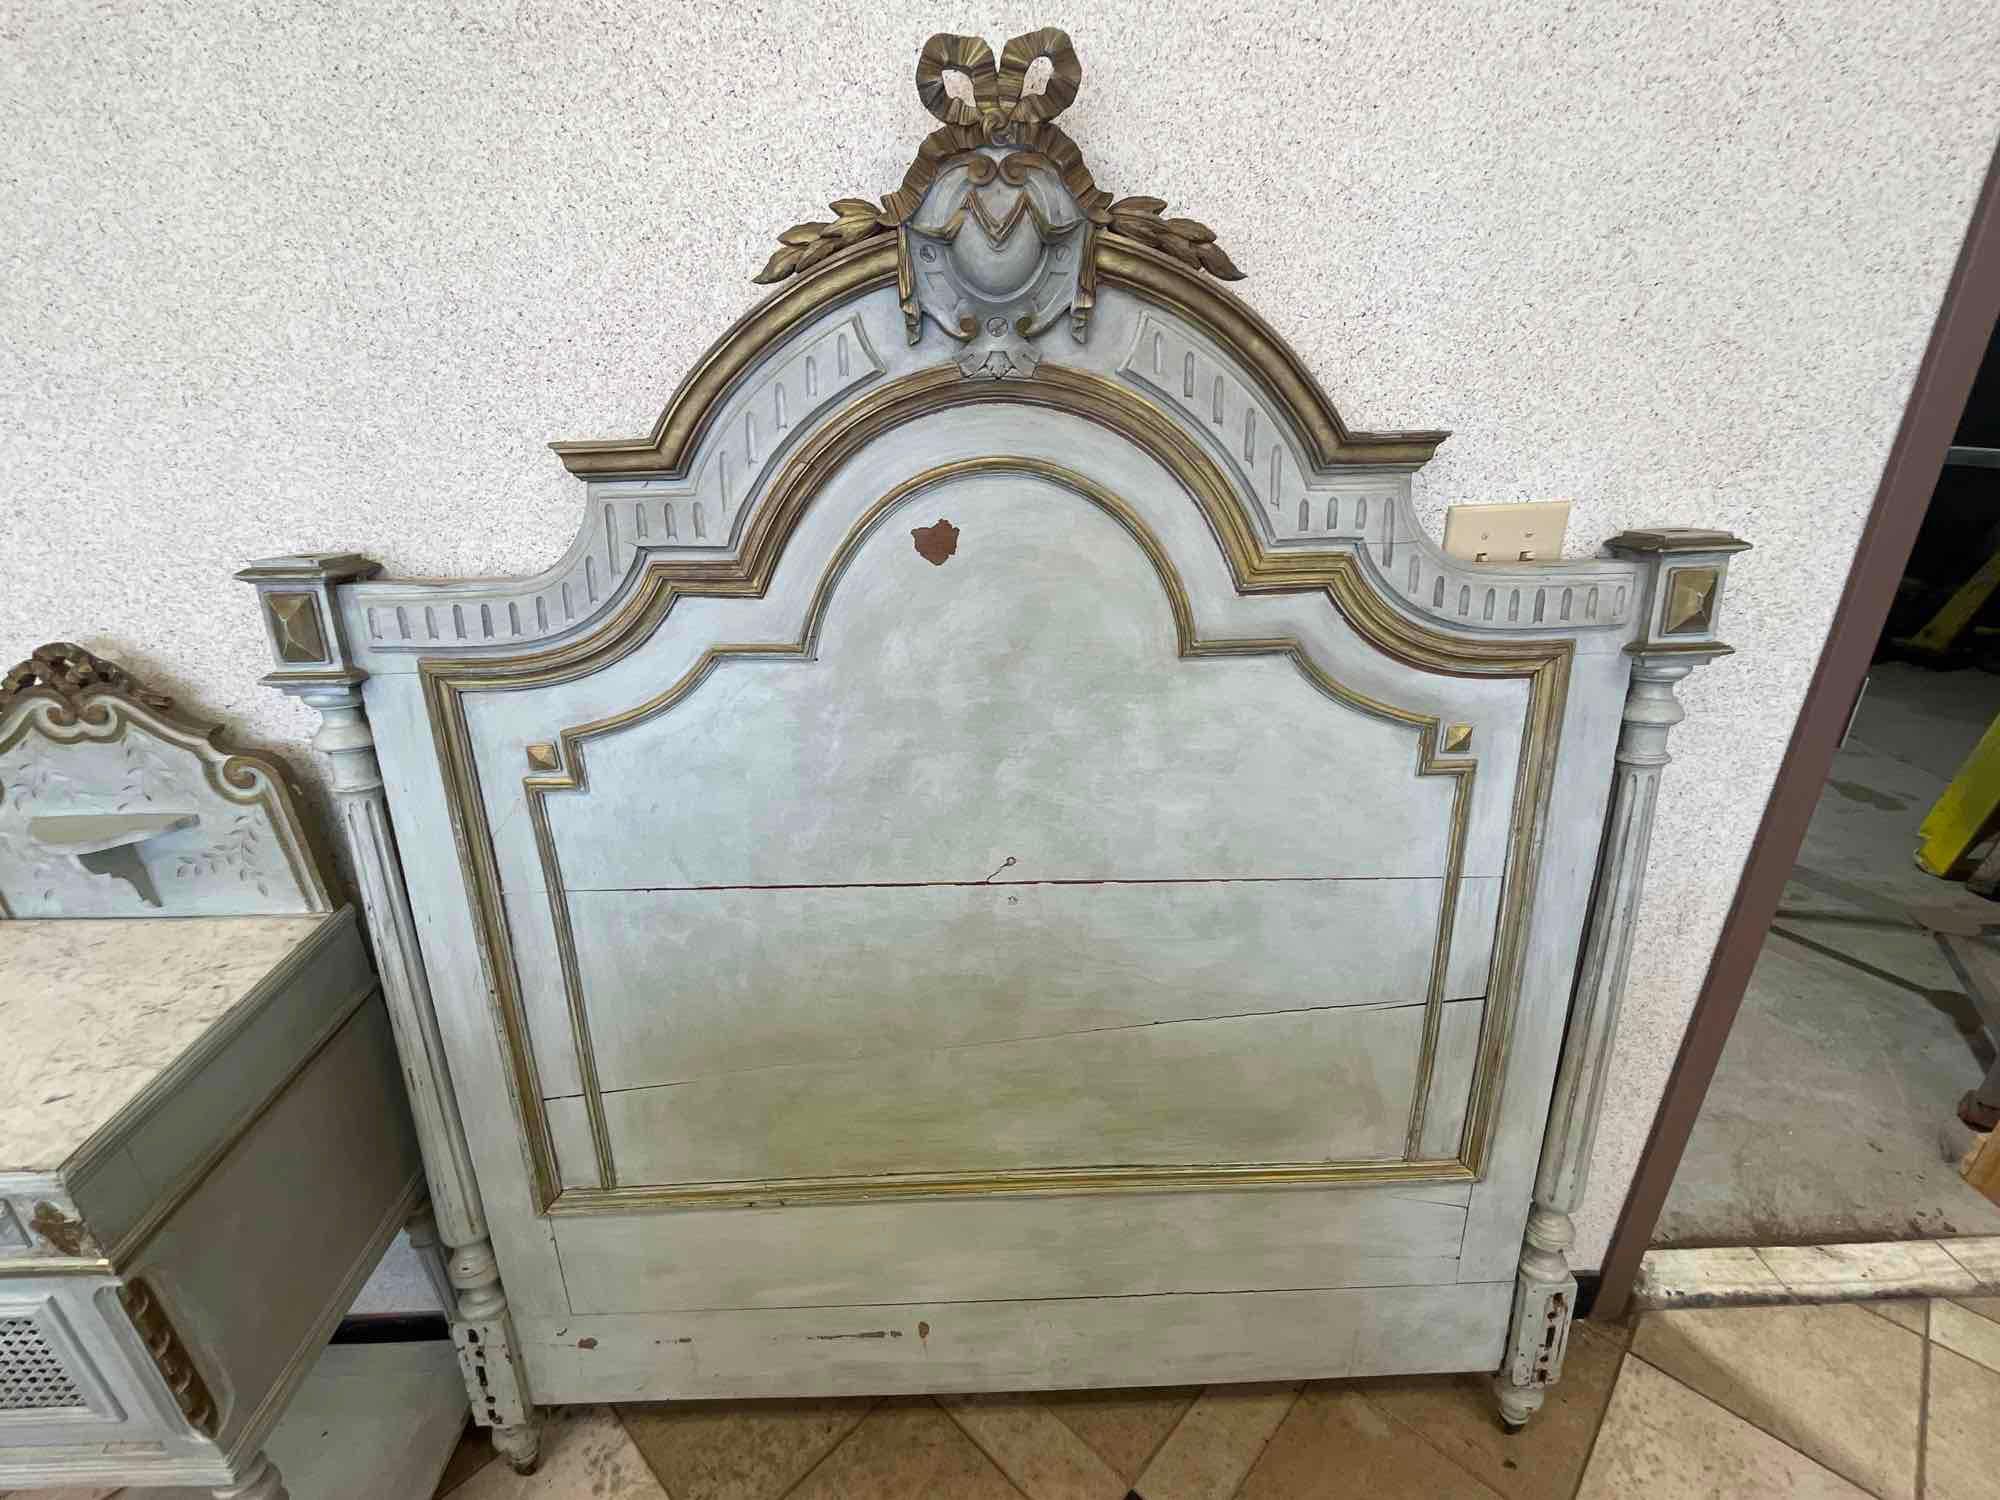 Ornate French Empire Bedroom Set with Headboard, Footboard, and Side Stand